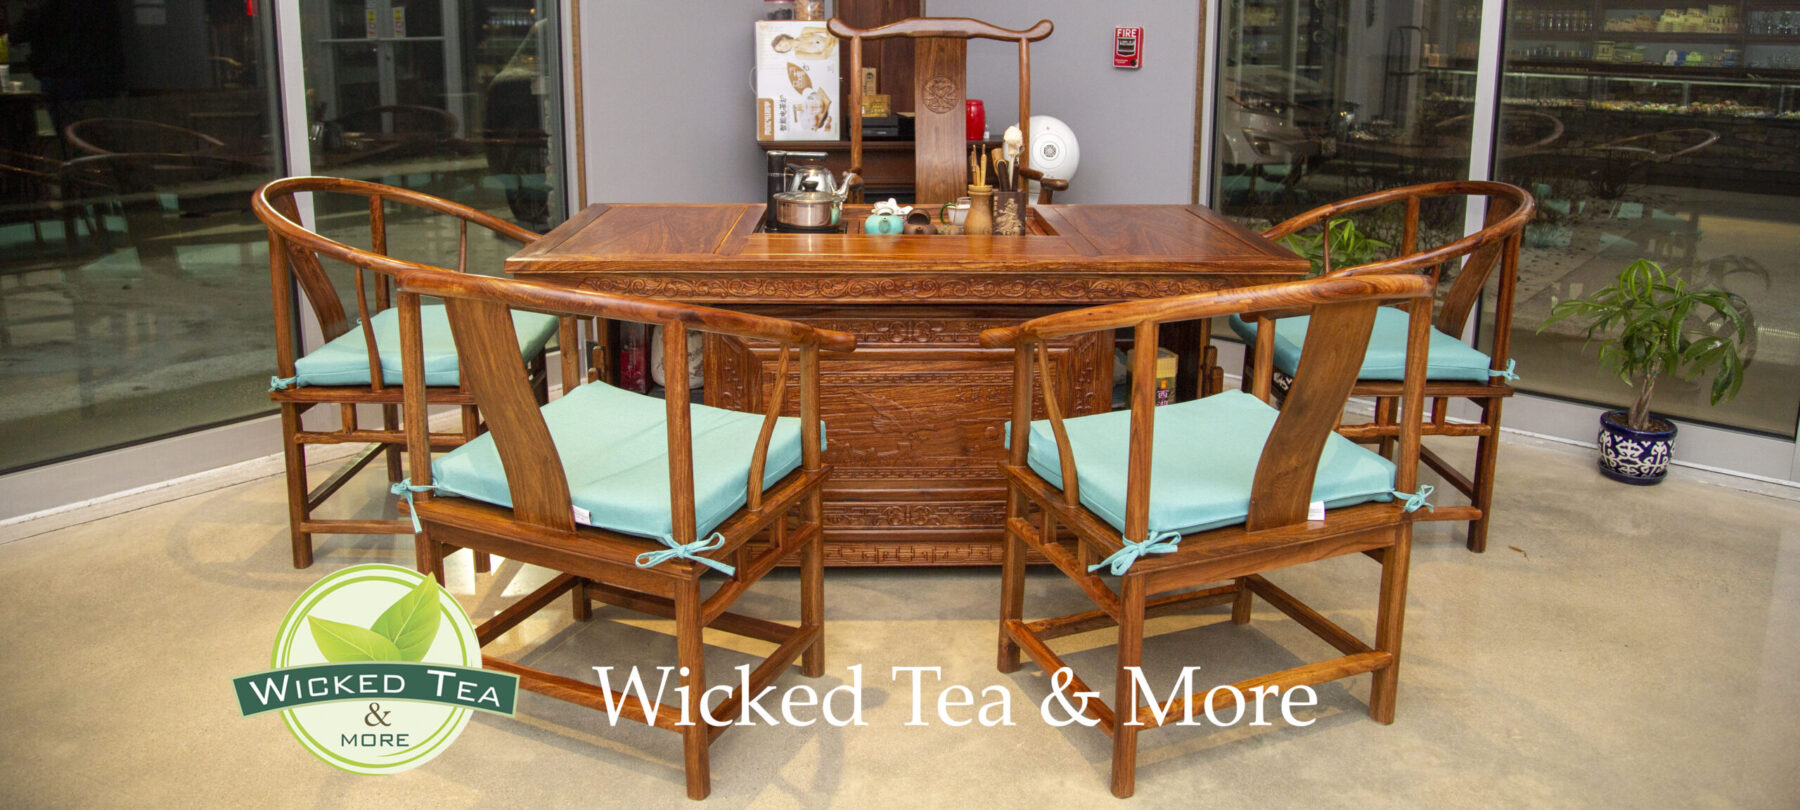 A wooden table with 4 chairs. A tea set is laid out.